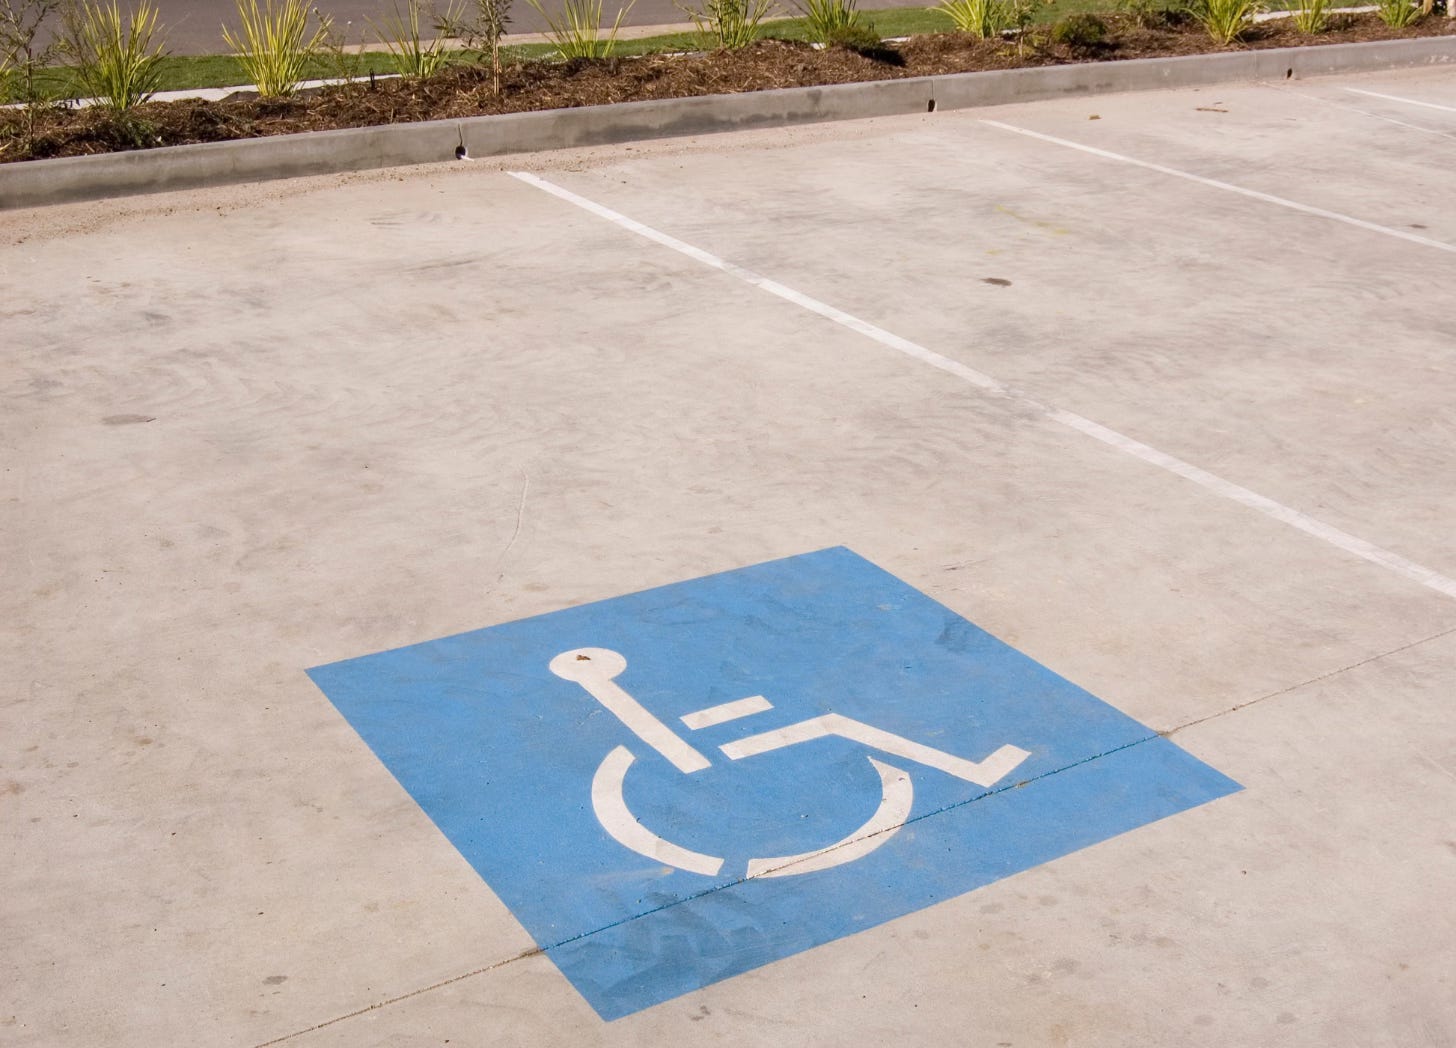 Wheelchair symbol painted onto the pavement of a parking space